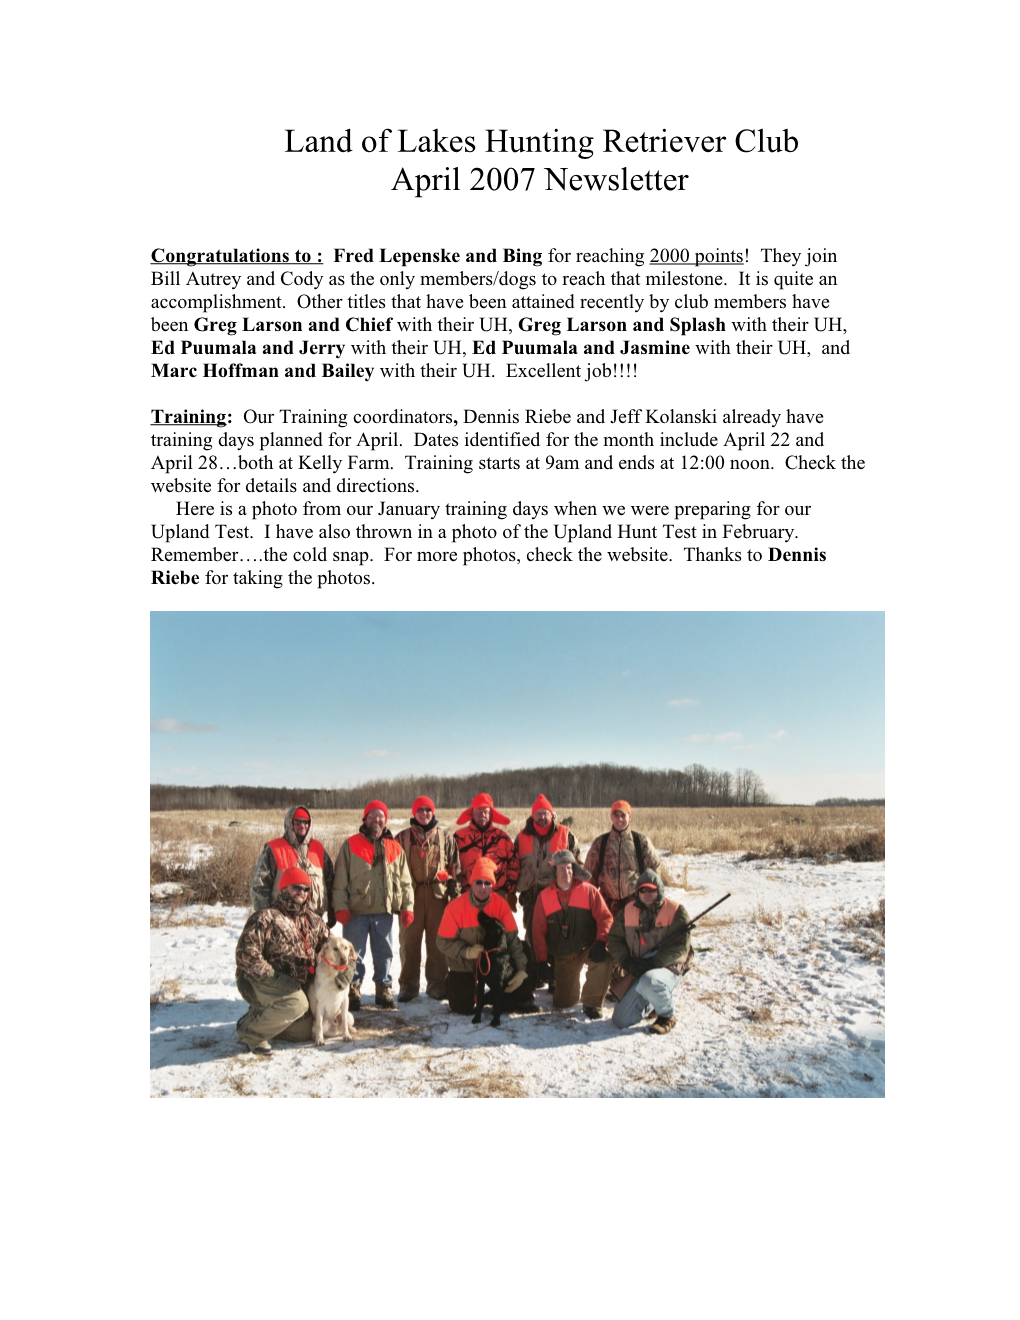 Annual Wild Game Potluck and Awards Banquet at the Samsons on 06Jan07